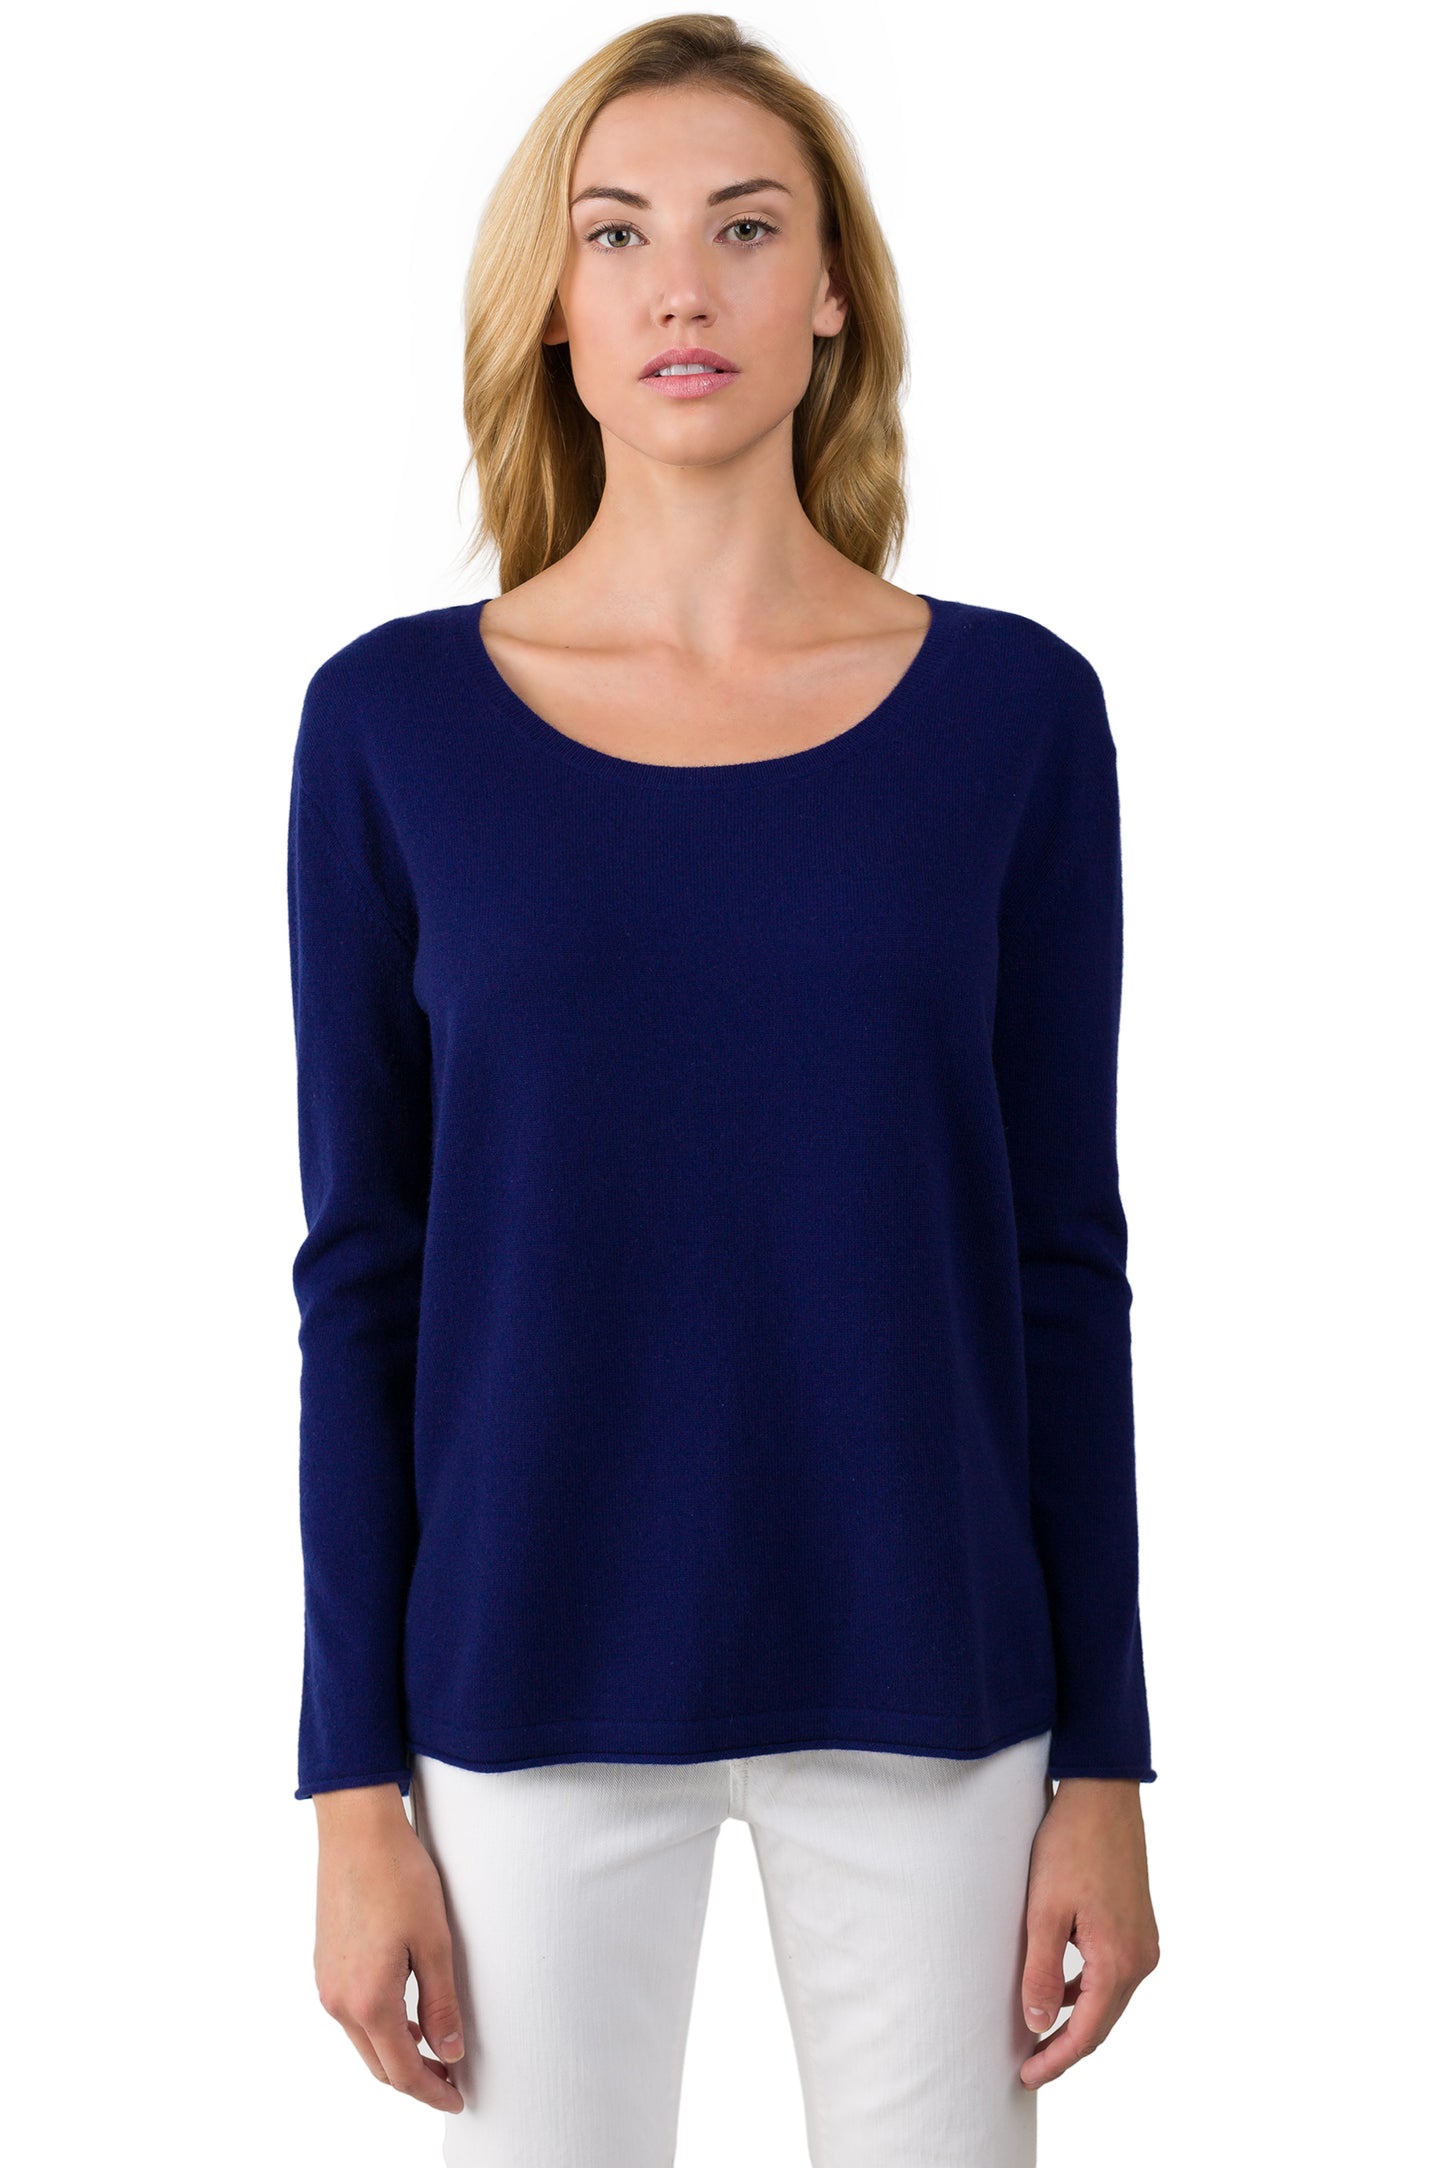 J CASHMERE Women's 100% Cashmere Dolman Sleeve Pullover High Low Sweater